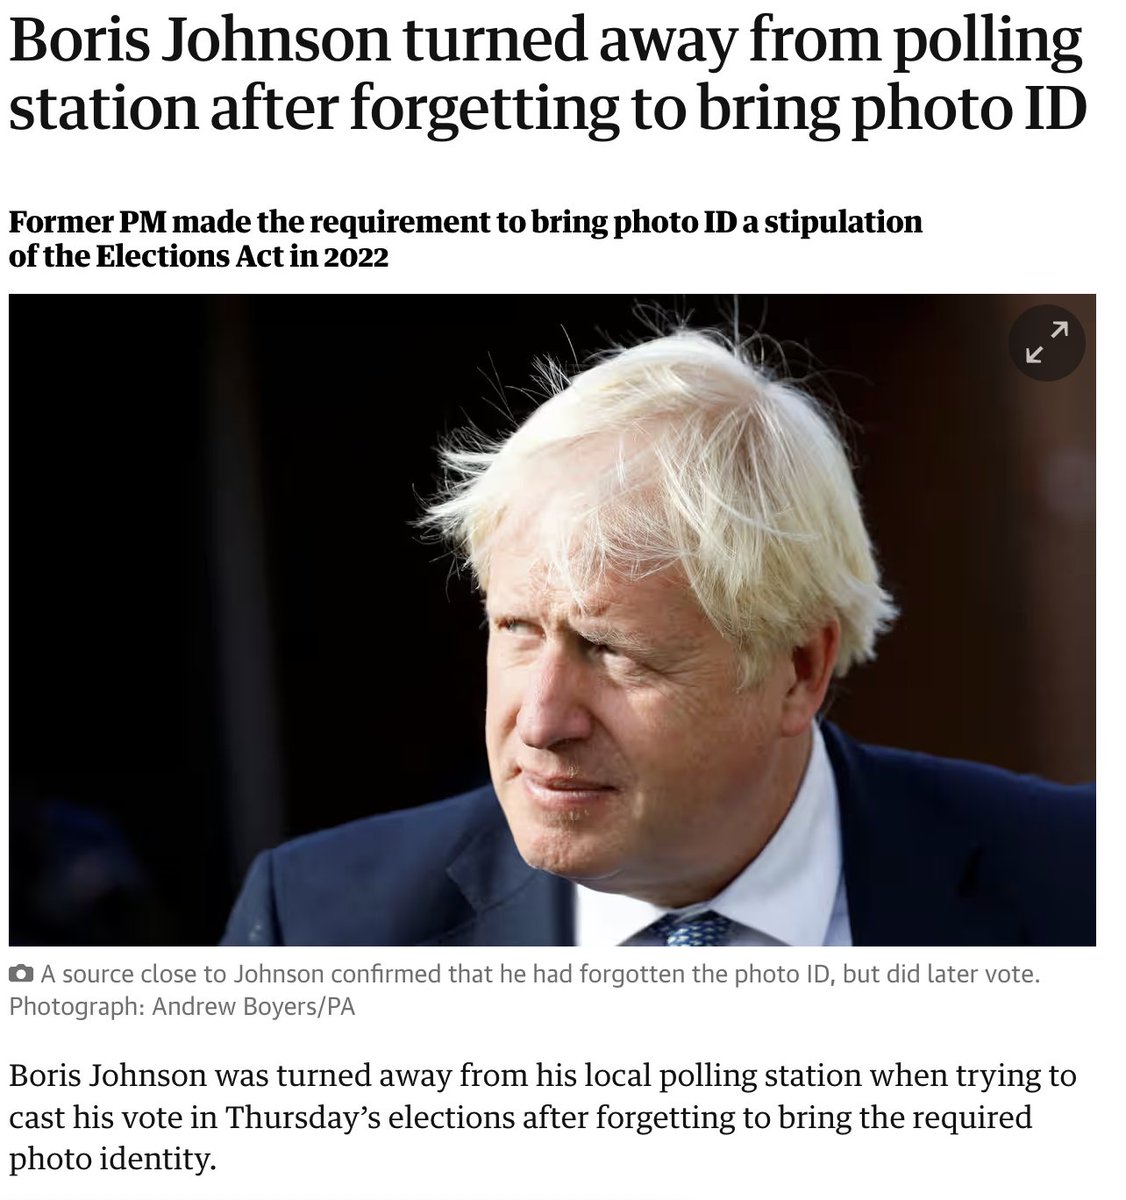 As Prime Minister of the UK, he introduced the requirement for people to show ID to vote and then did not bring ID to vote. This man should never be allowed anywhere near a position of power! theguardian.com/uk-news/articl…